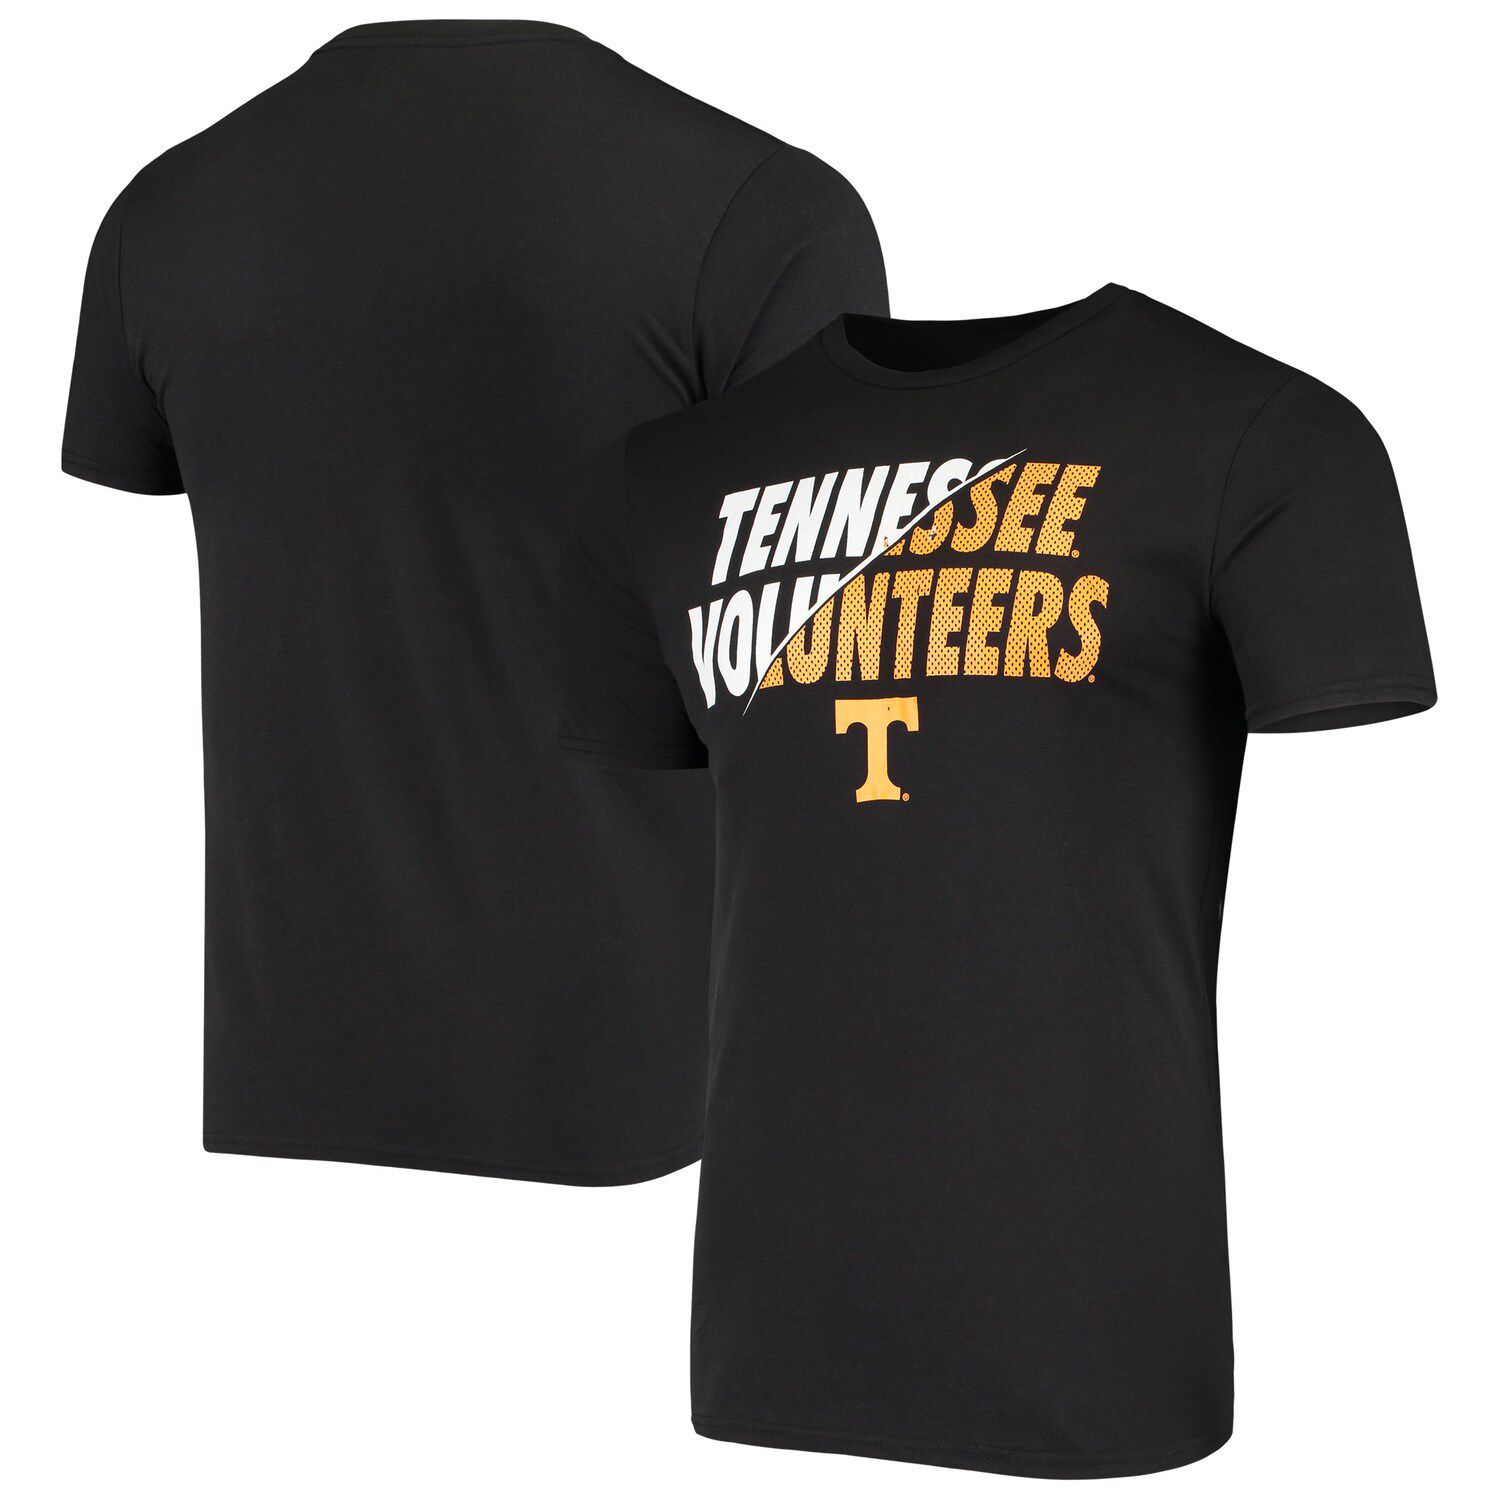 Image for Unbranded Men's Black Tennessee Volunteers Game Ready T-Shirt at Kohl's.